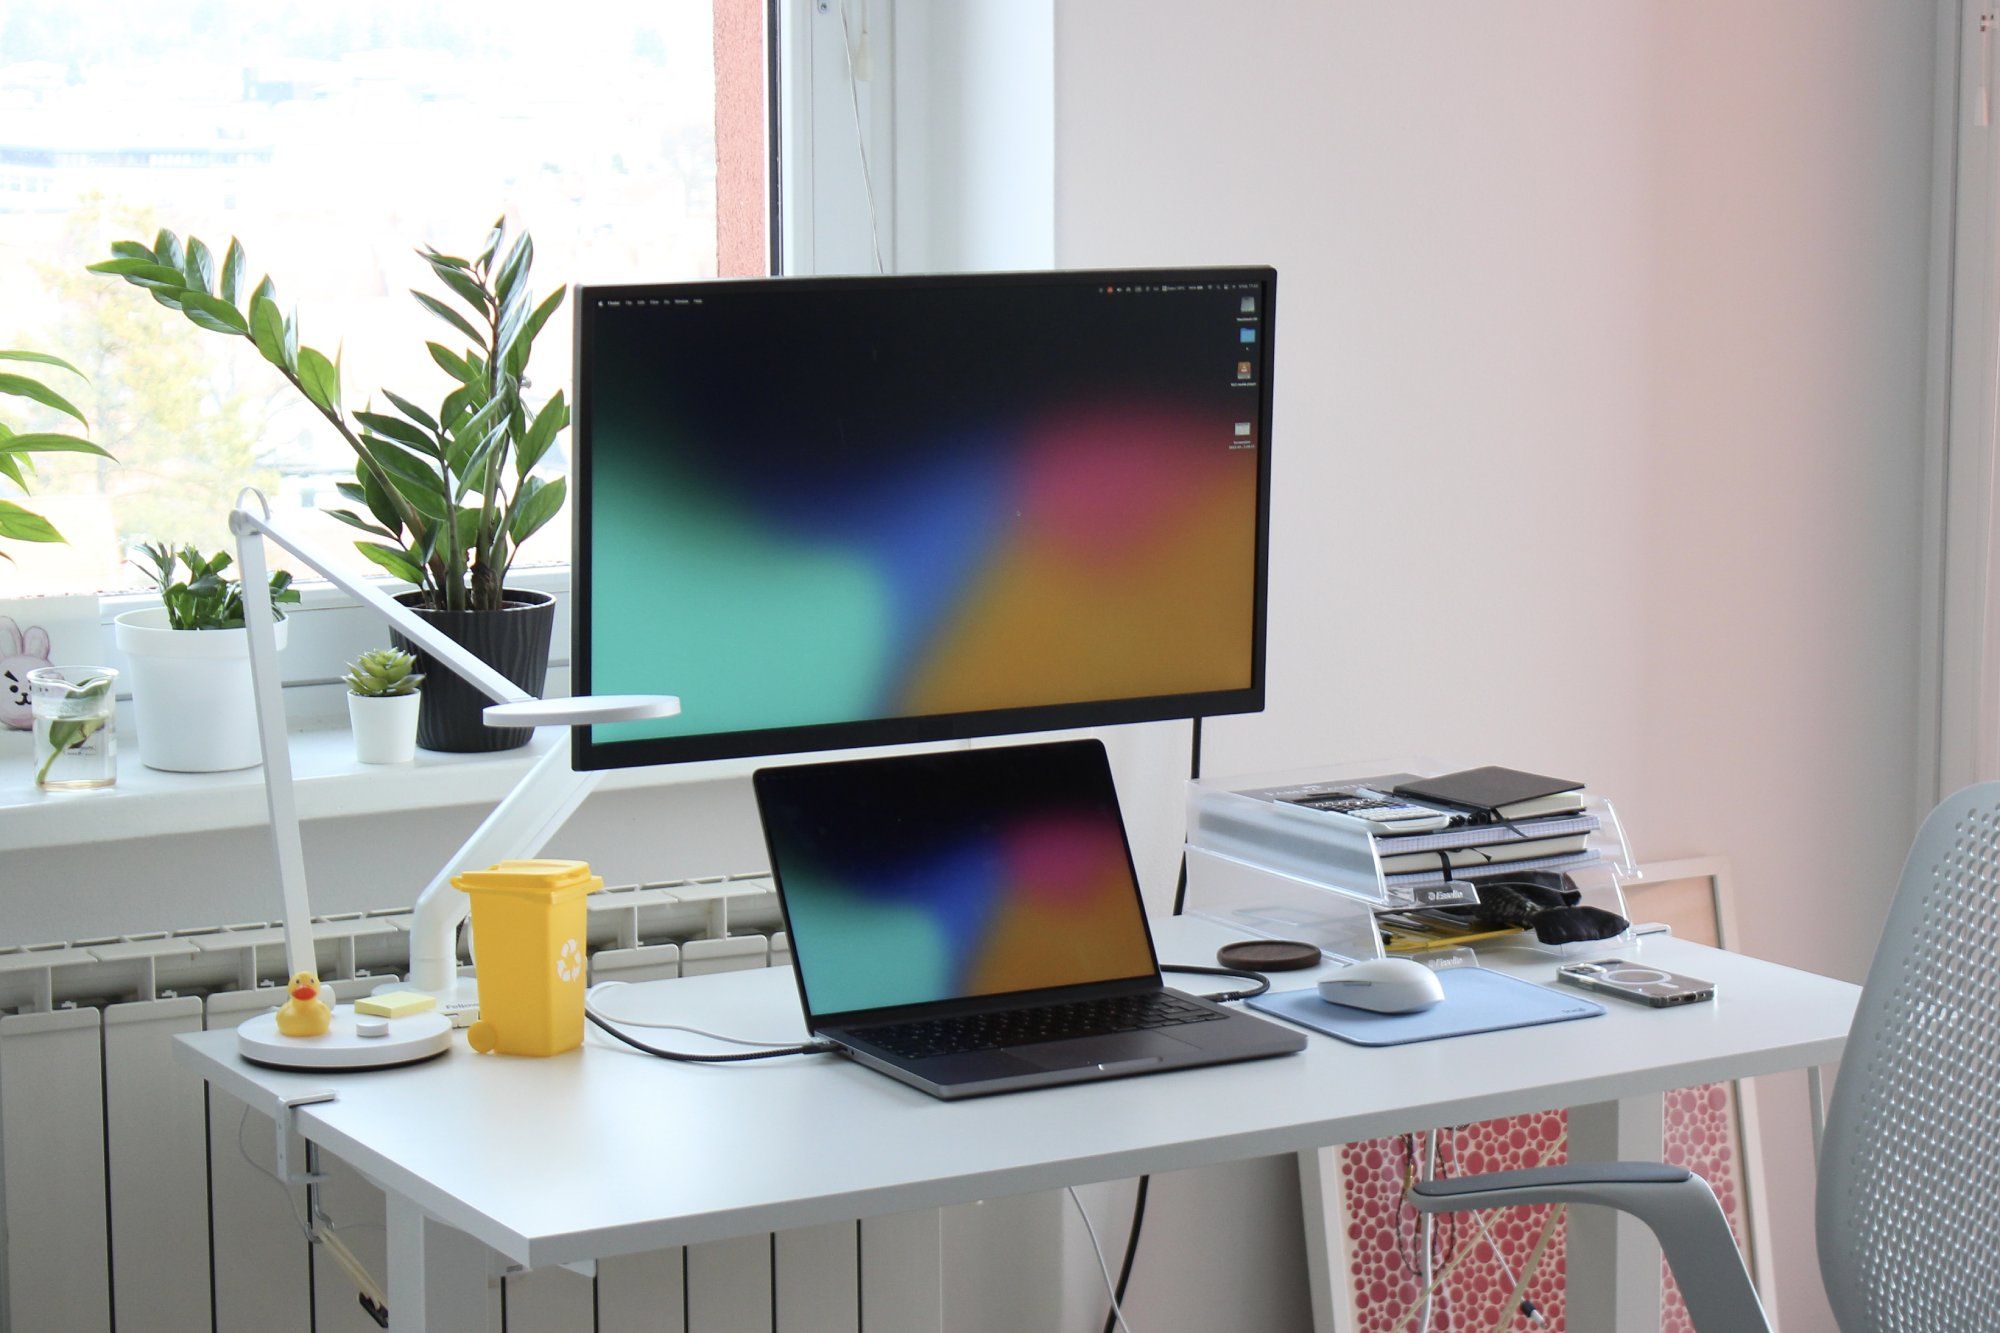 A well-organised sit-stand desk setup by the window with plants on the windowsill